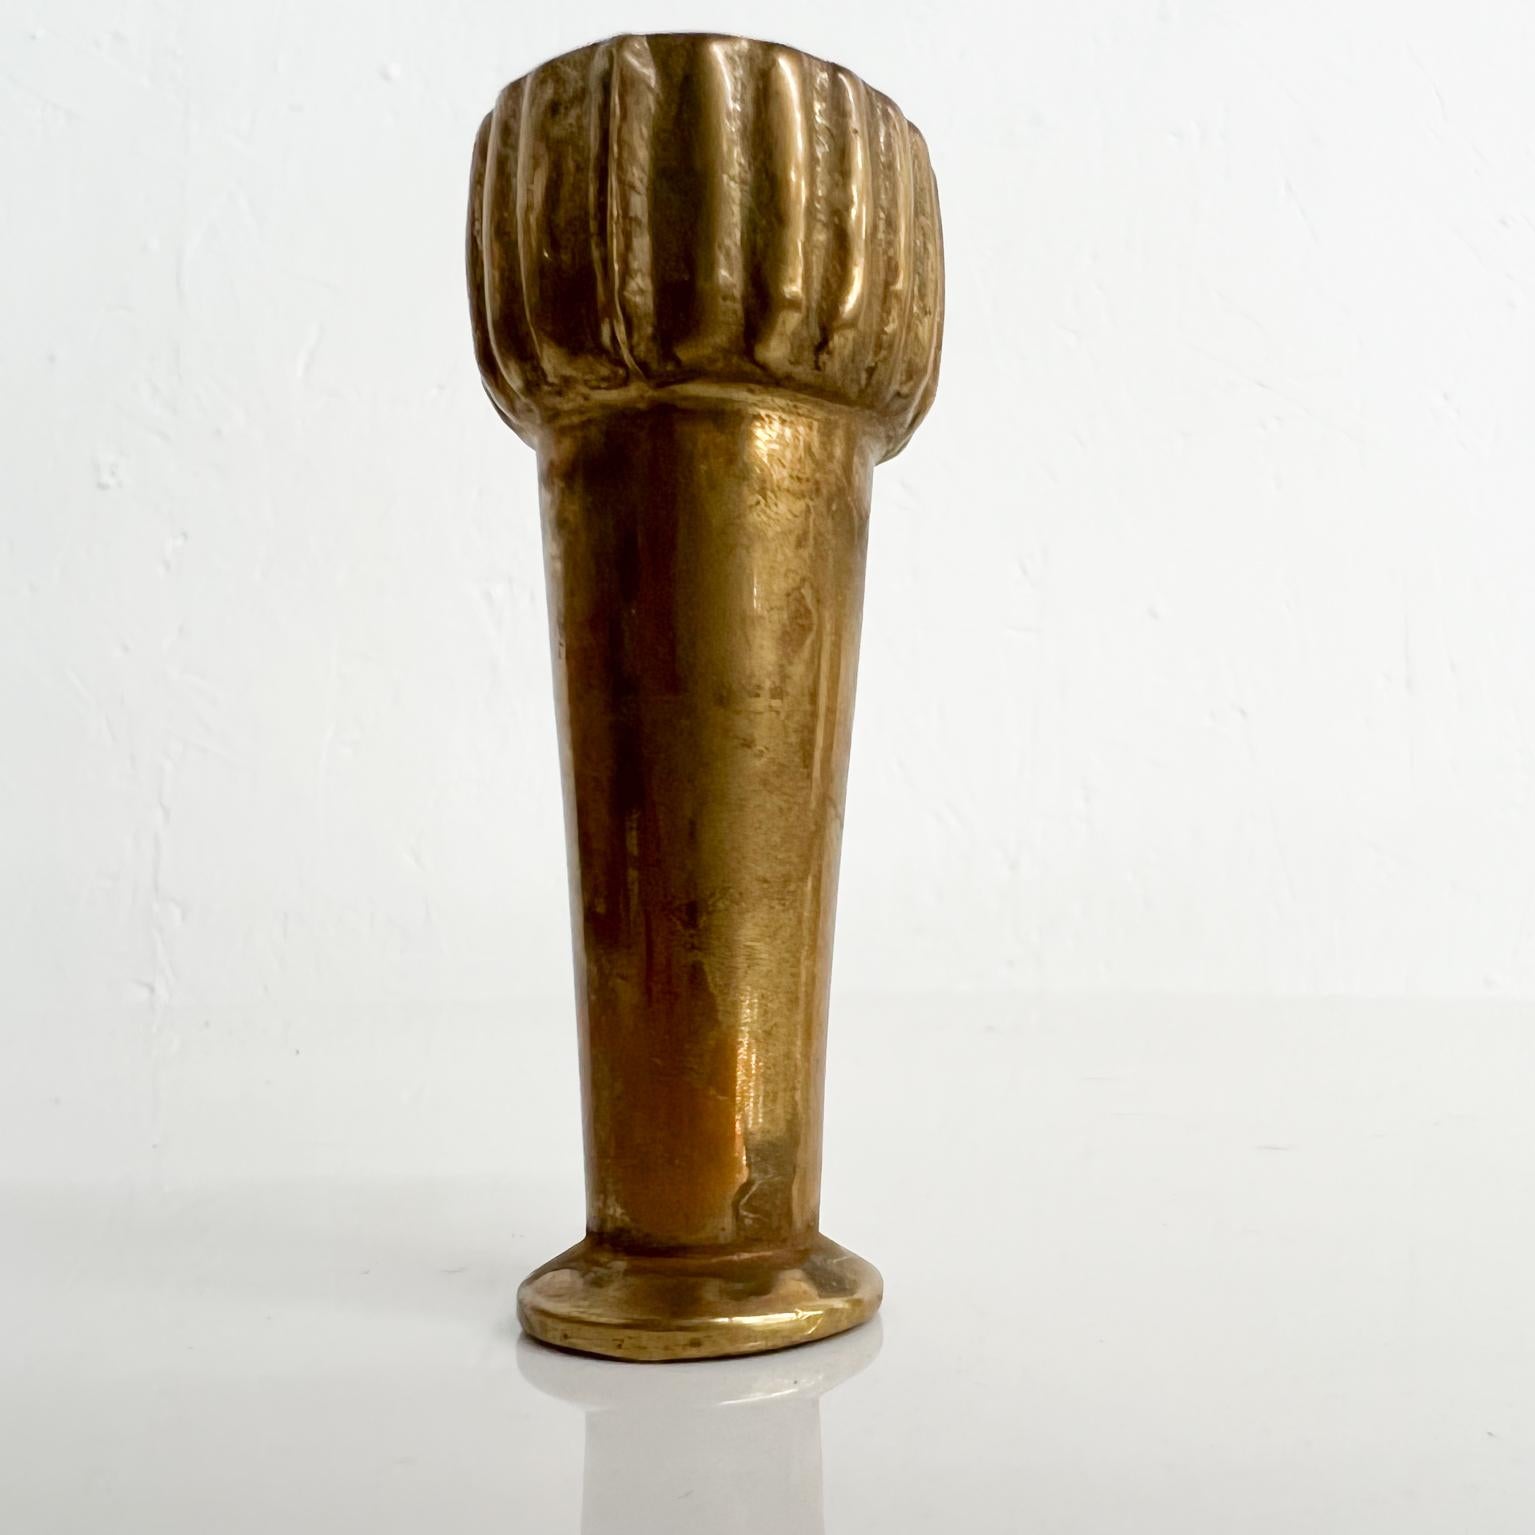 Leg Tips
Lovely Set of 6 Brass Sabots Legs Italian
(Sabot Ferrules Chair tips)
Elegant Style in Brass Detail
2.75 H x 1.88 H
Original vintage preowned unrestored condition.
Please view the images.

